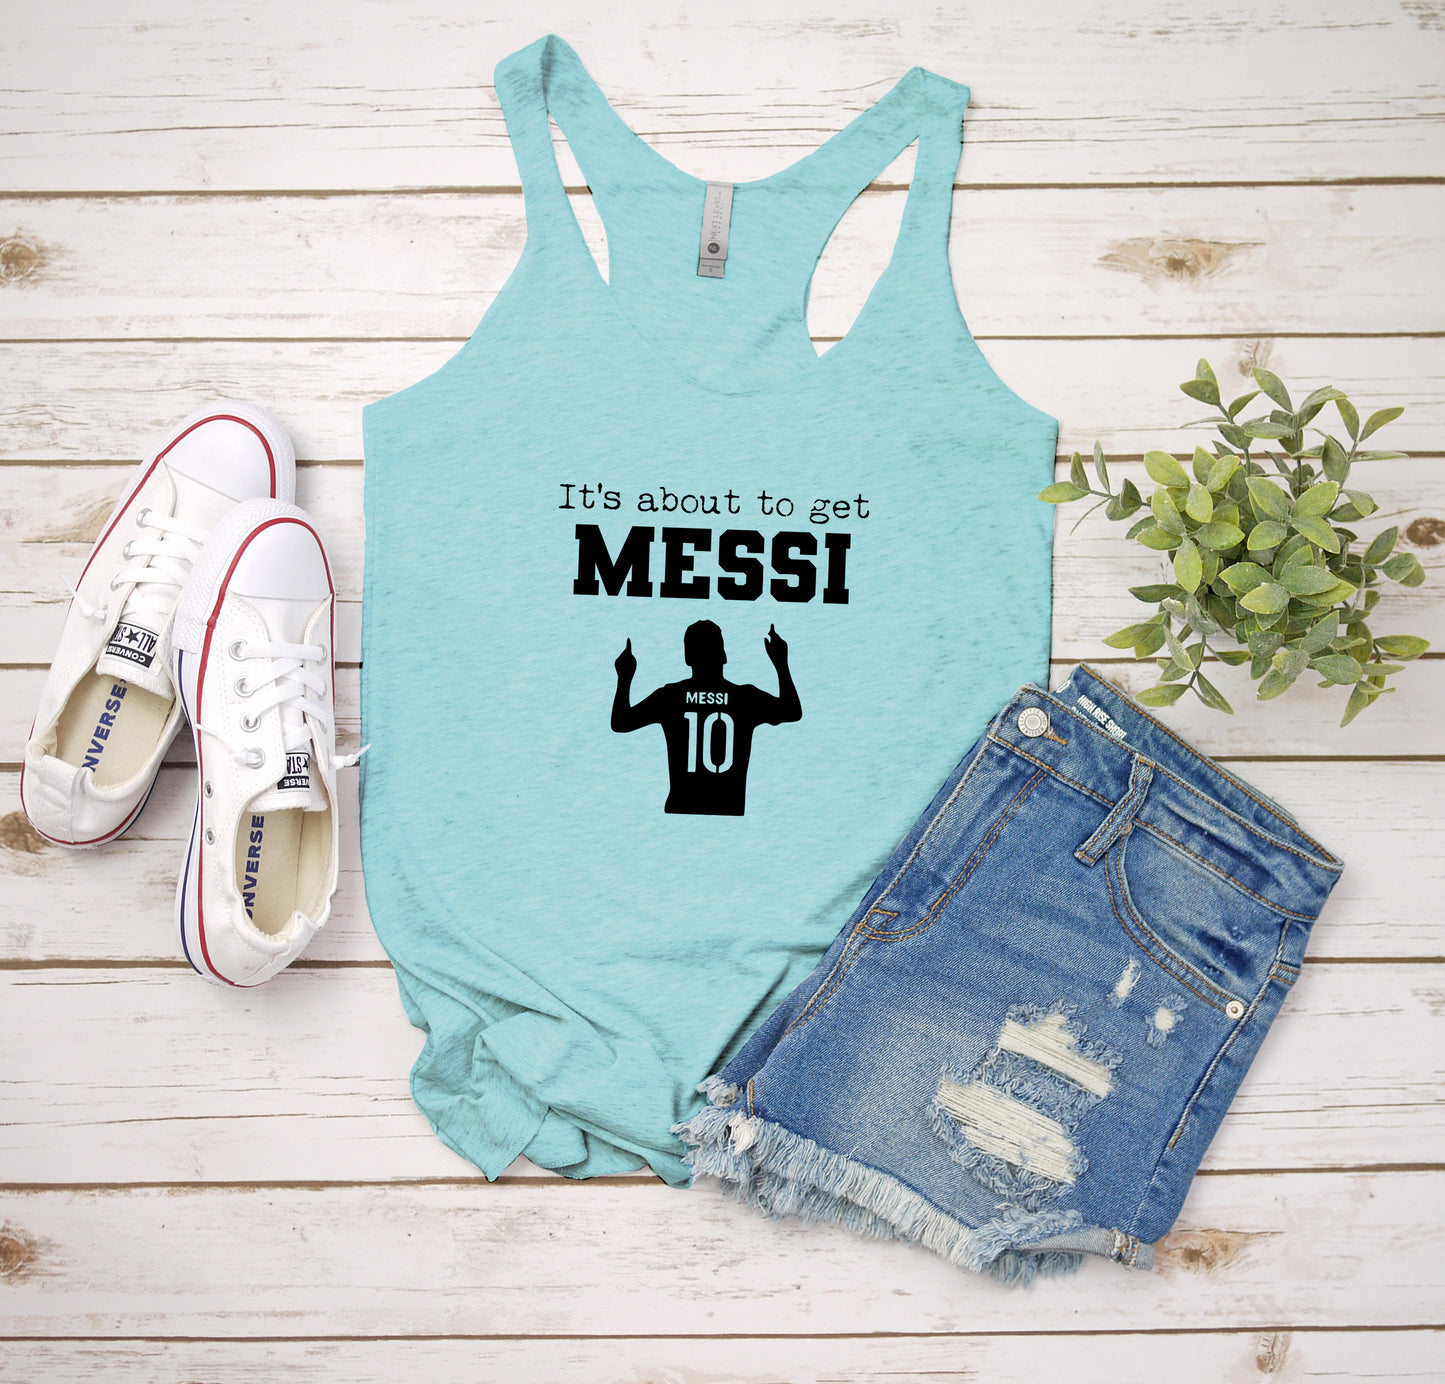 It's About To Get Messi (Soccer) - Women's Tank - Heather Gray, Tahiti, or Envy